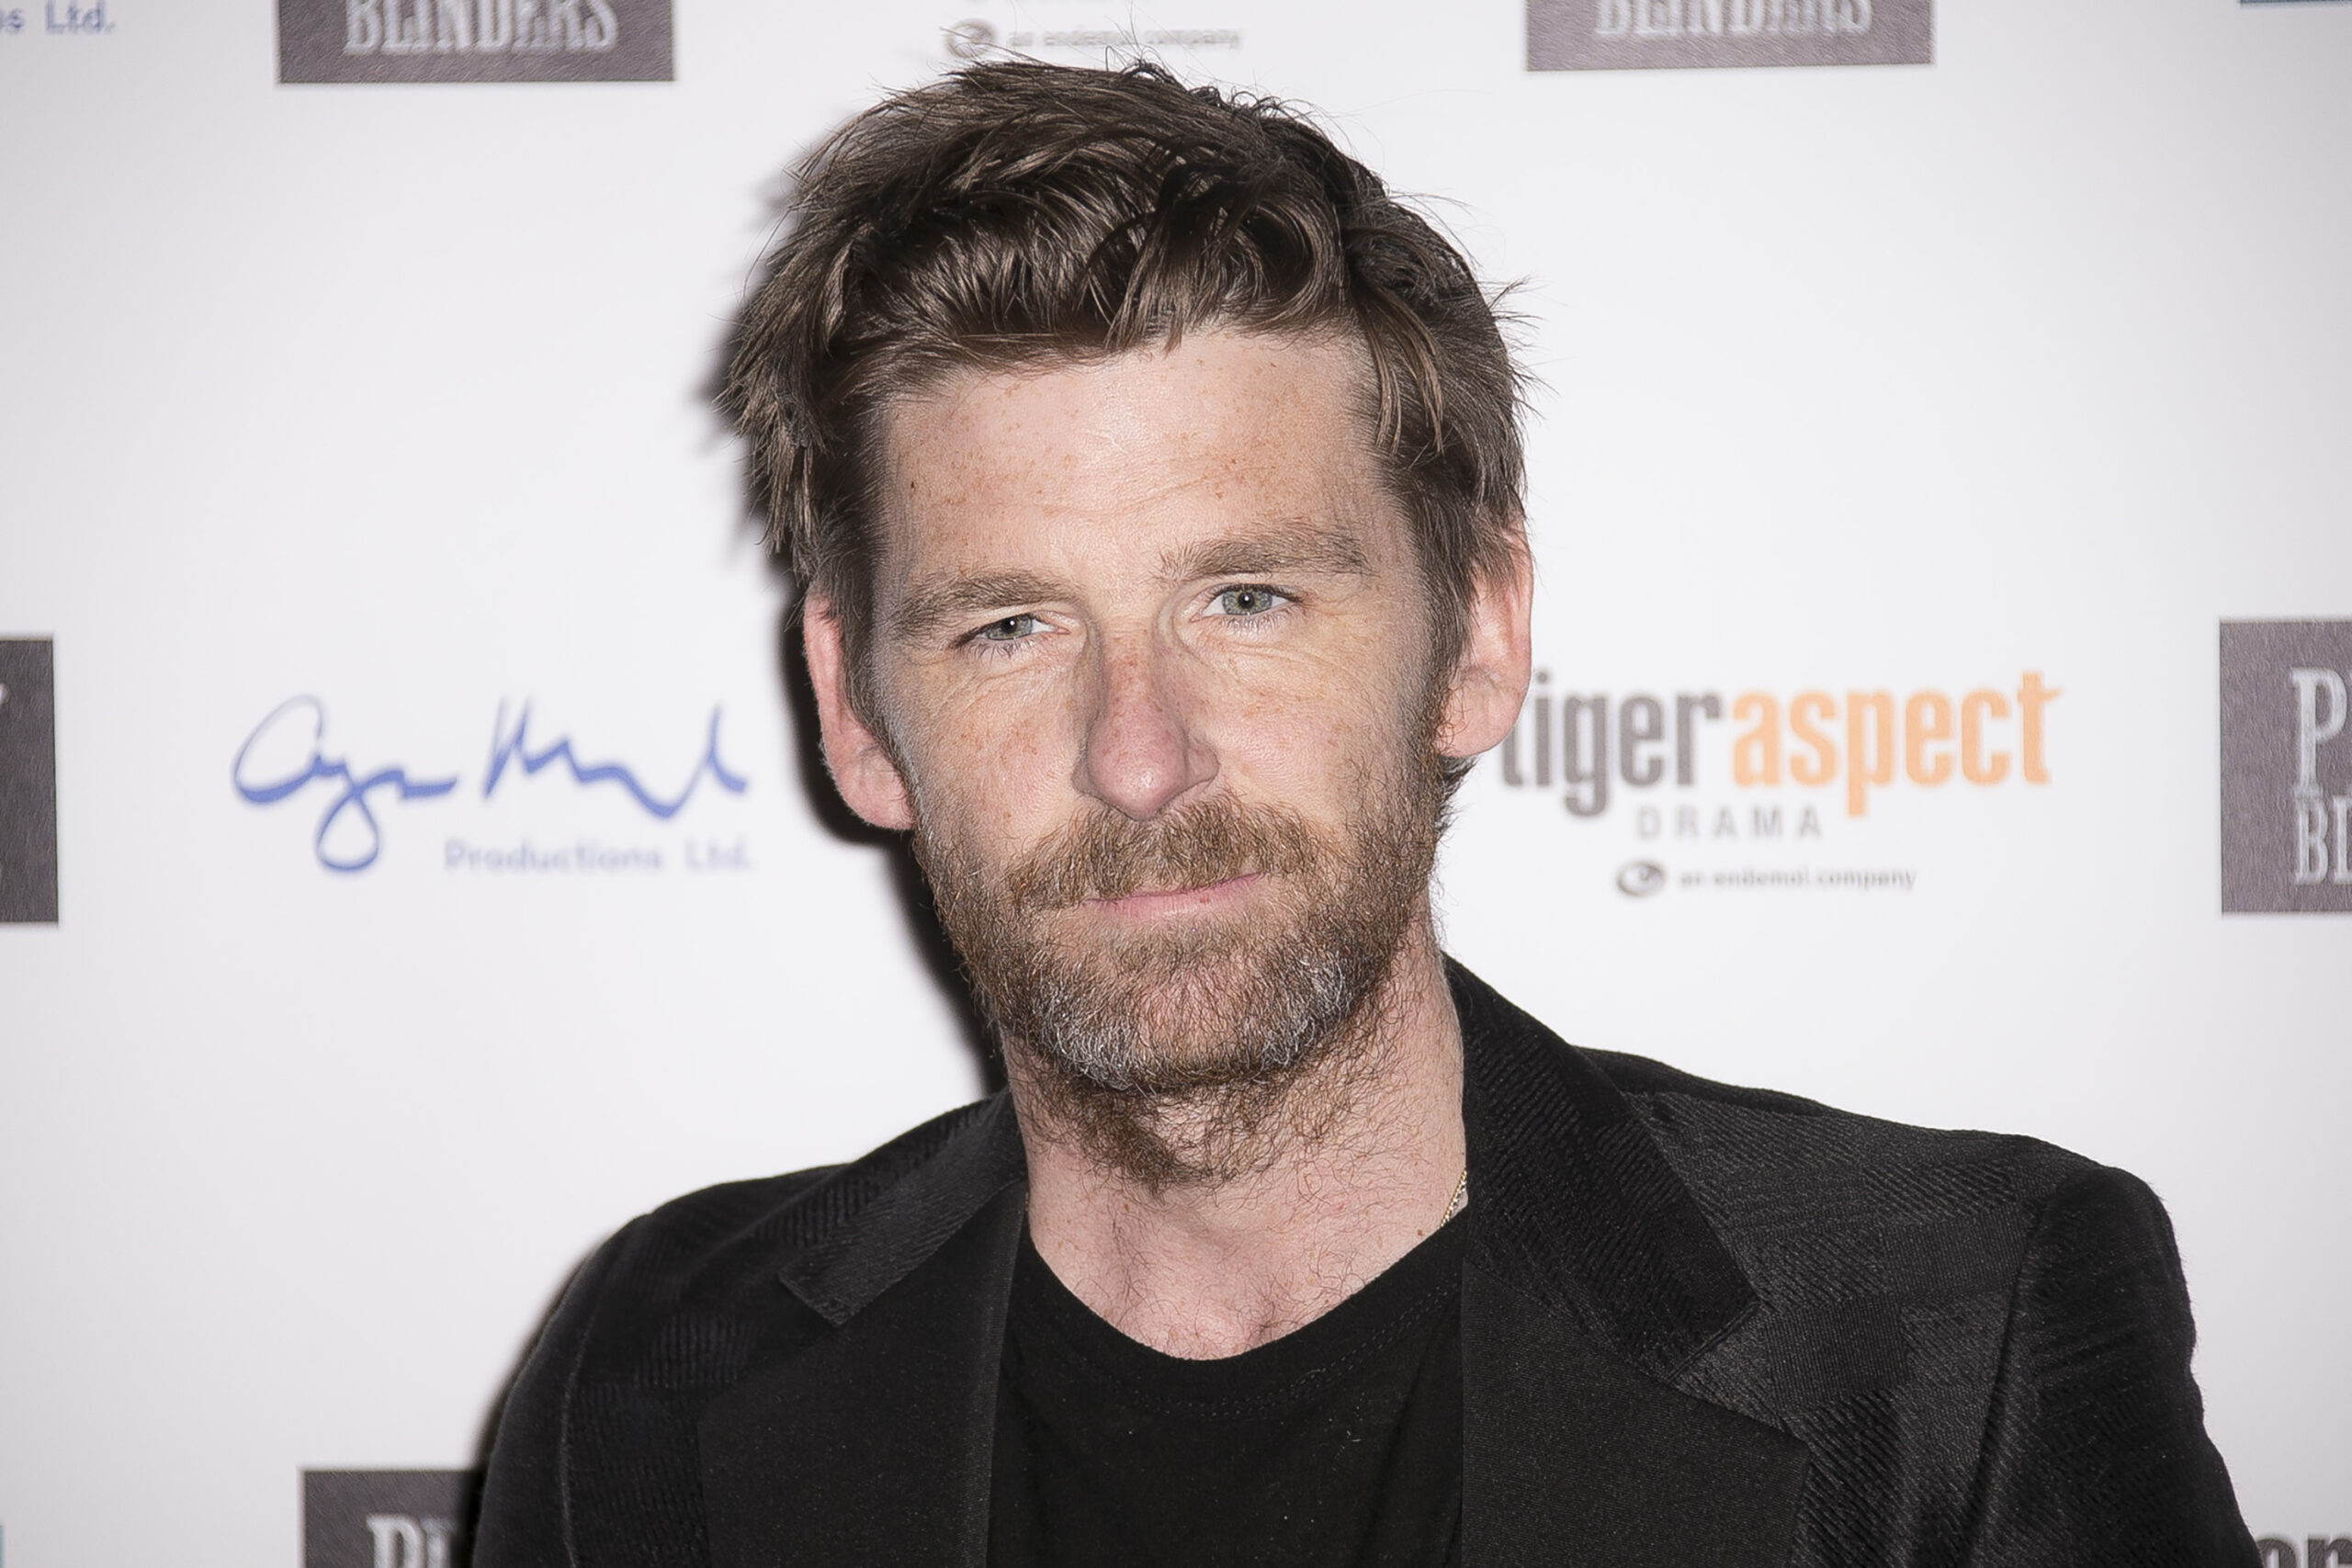 Actor Paul Anderson poses for photographers upon arrival at the screening of the new season of Peaky Blinders, at the BFI southbank in London, Tuesday, May 3, 2016. (Photo by Joel Ryan/Invision/AP)